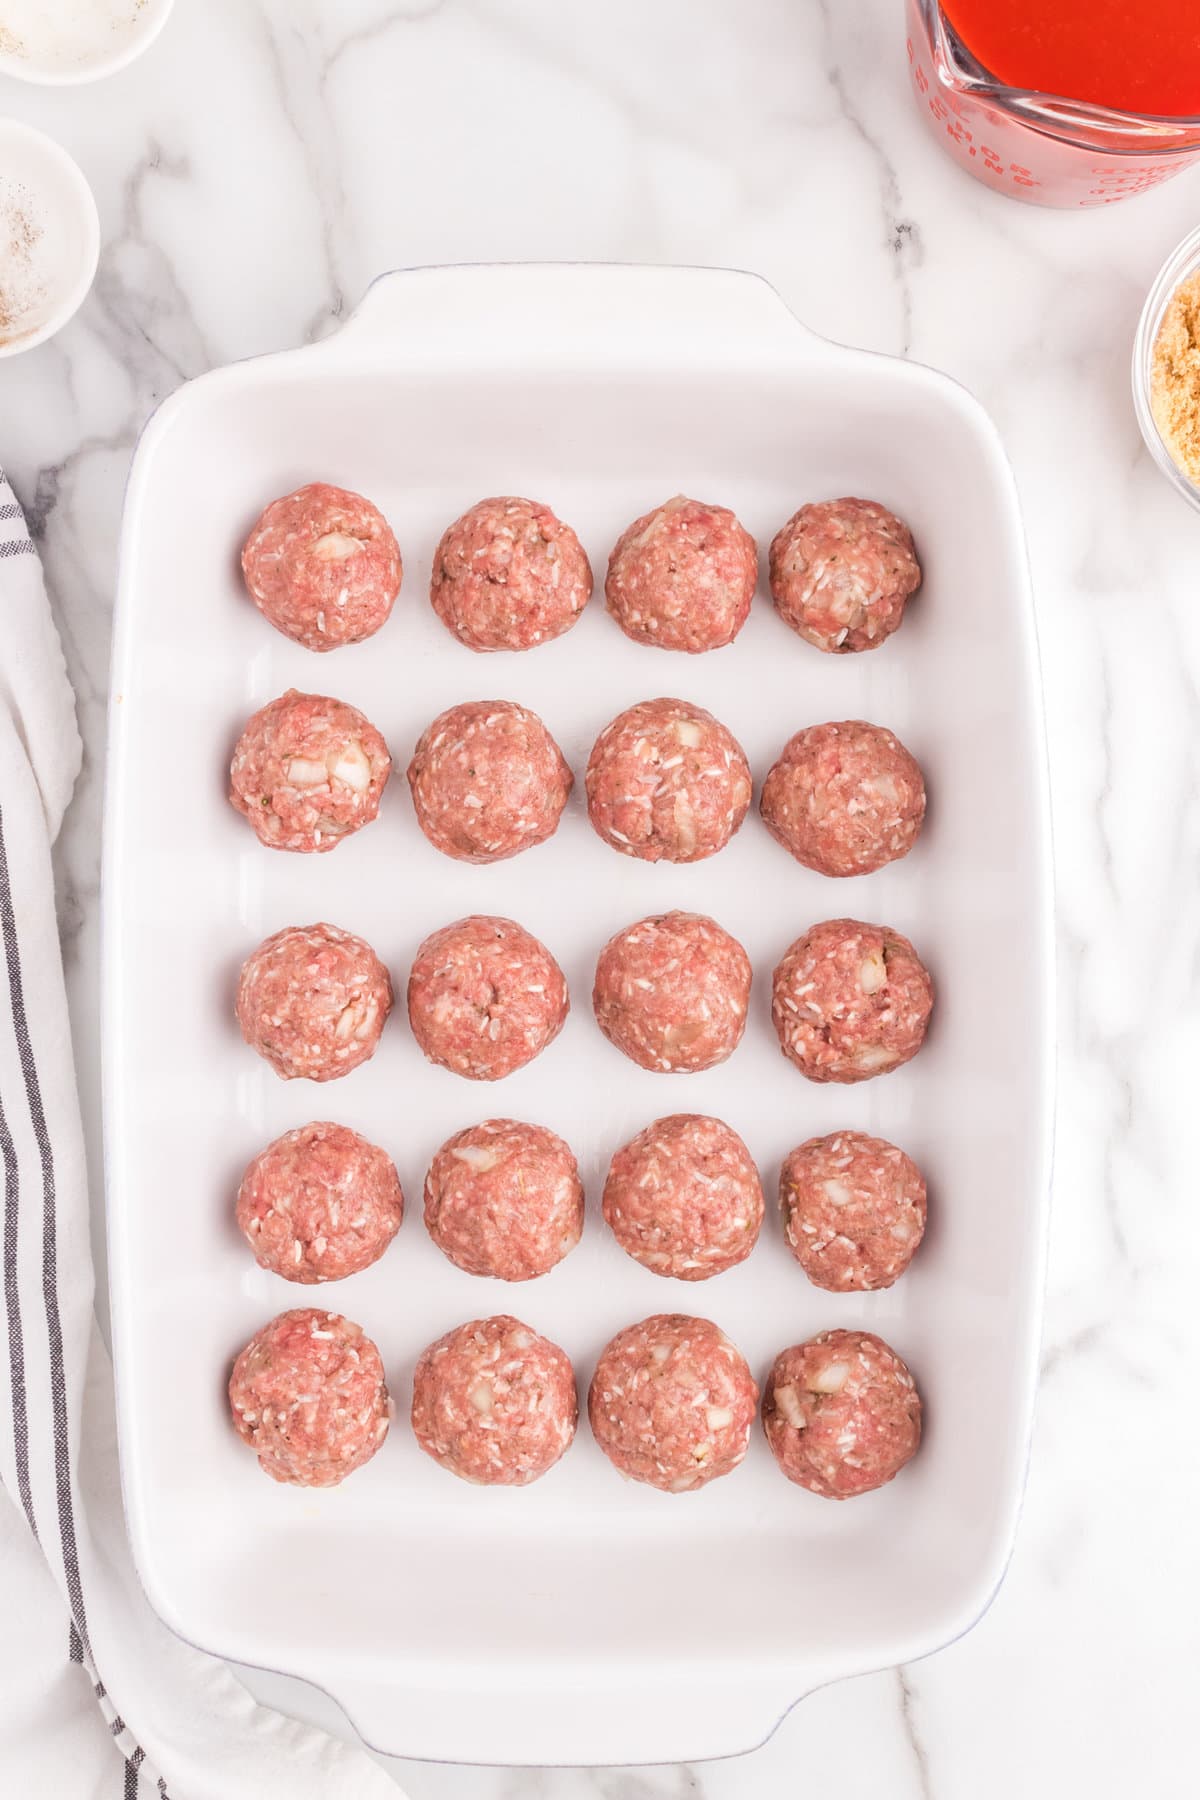 Porcupine Meatballs formed into balls and arranged in a 9x13 baking pan